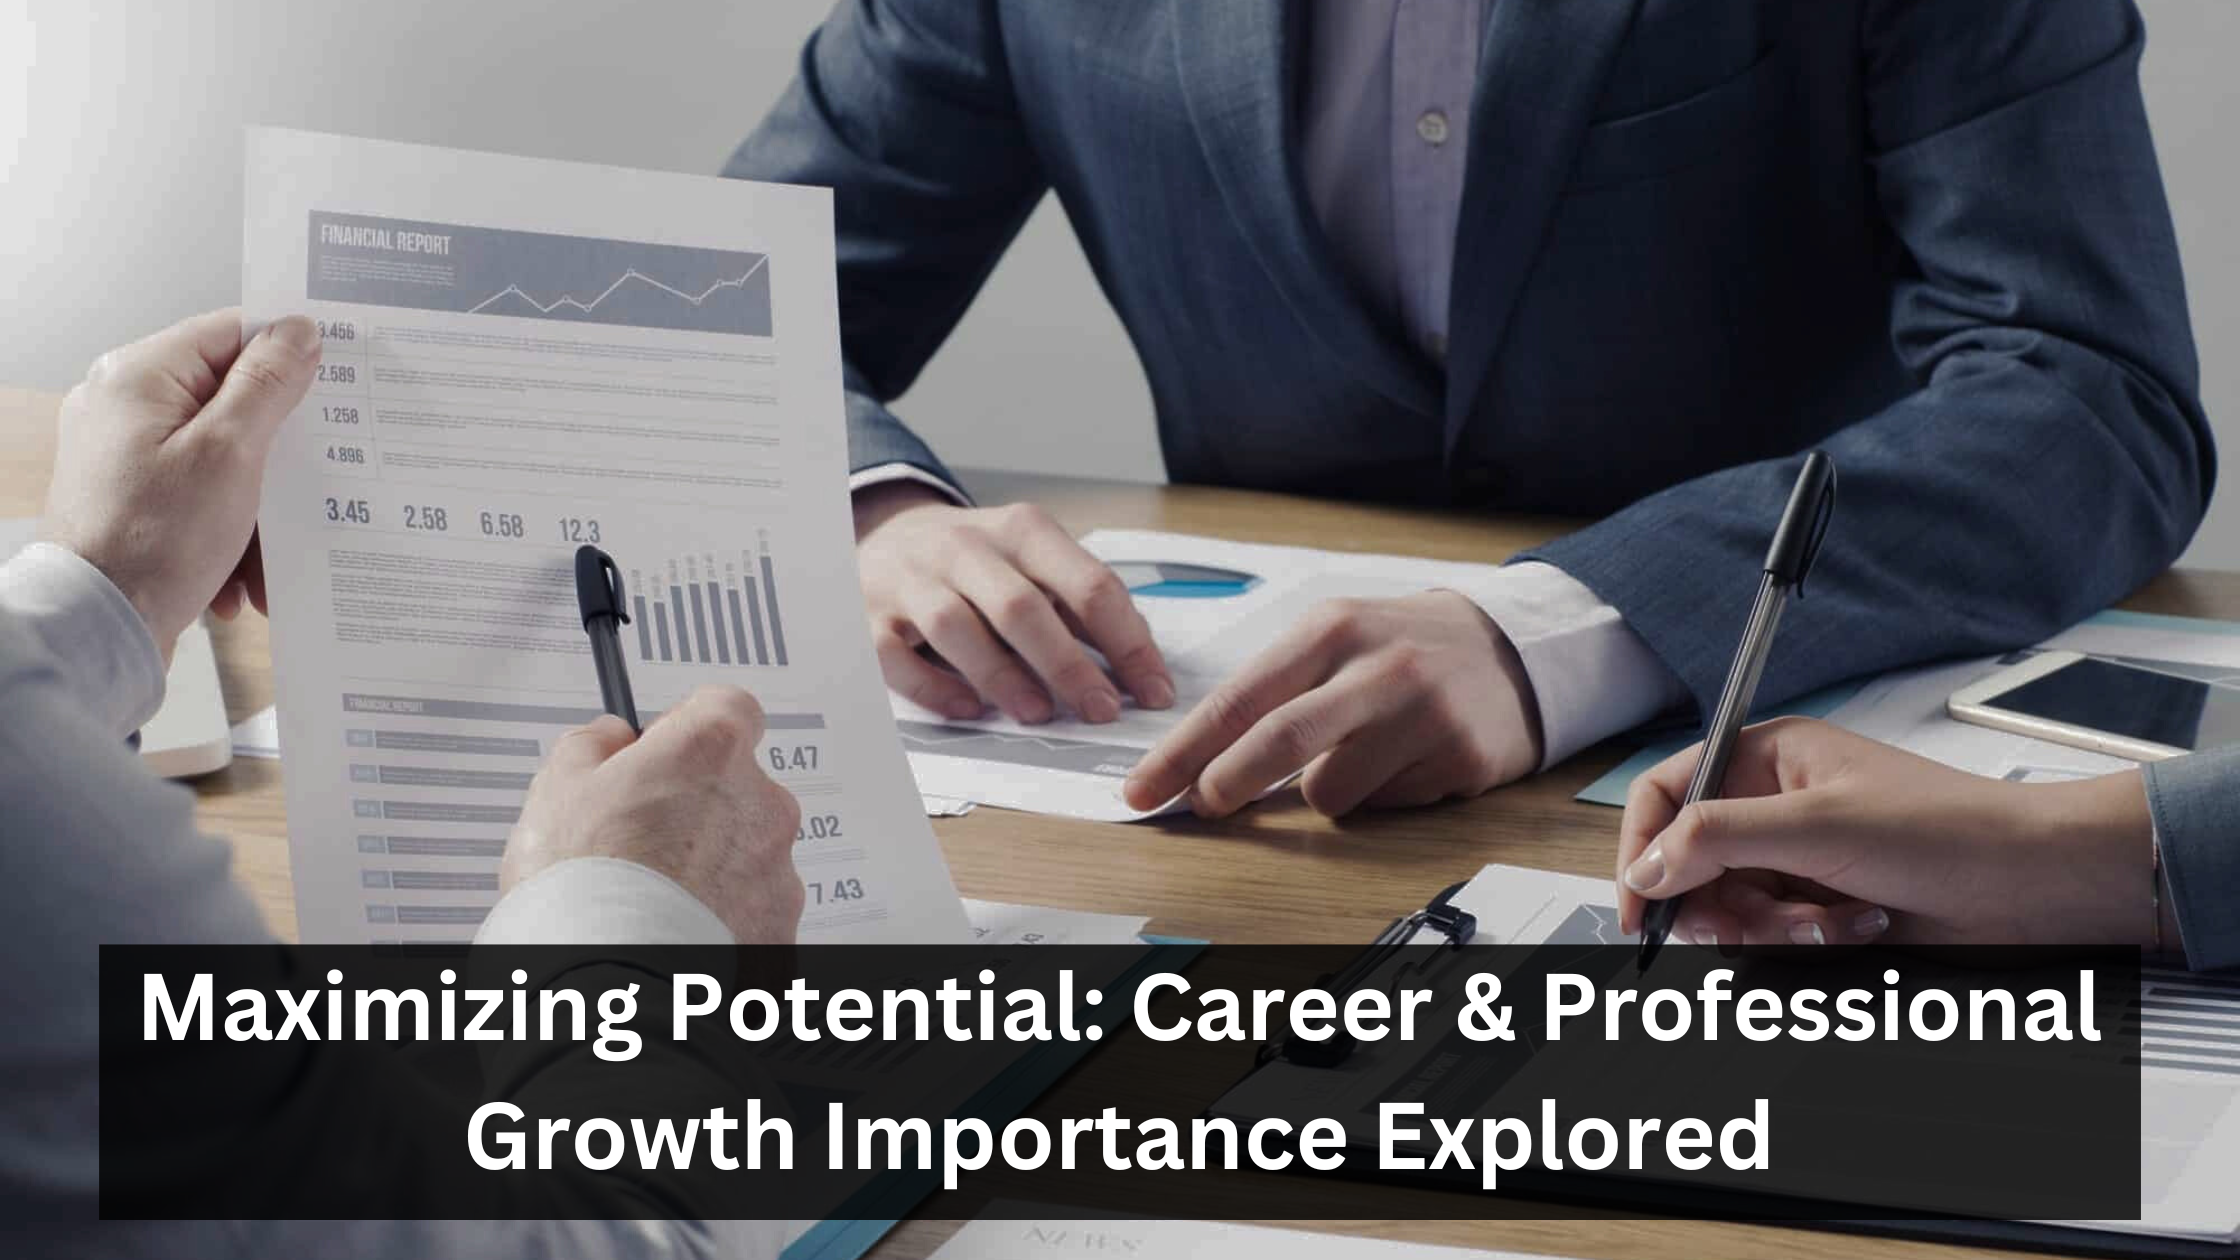 Career & Professional Growth